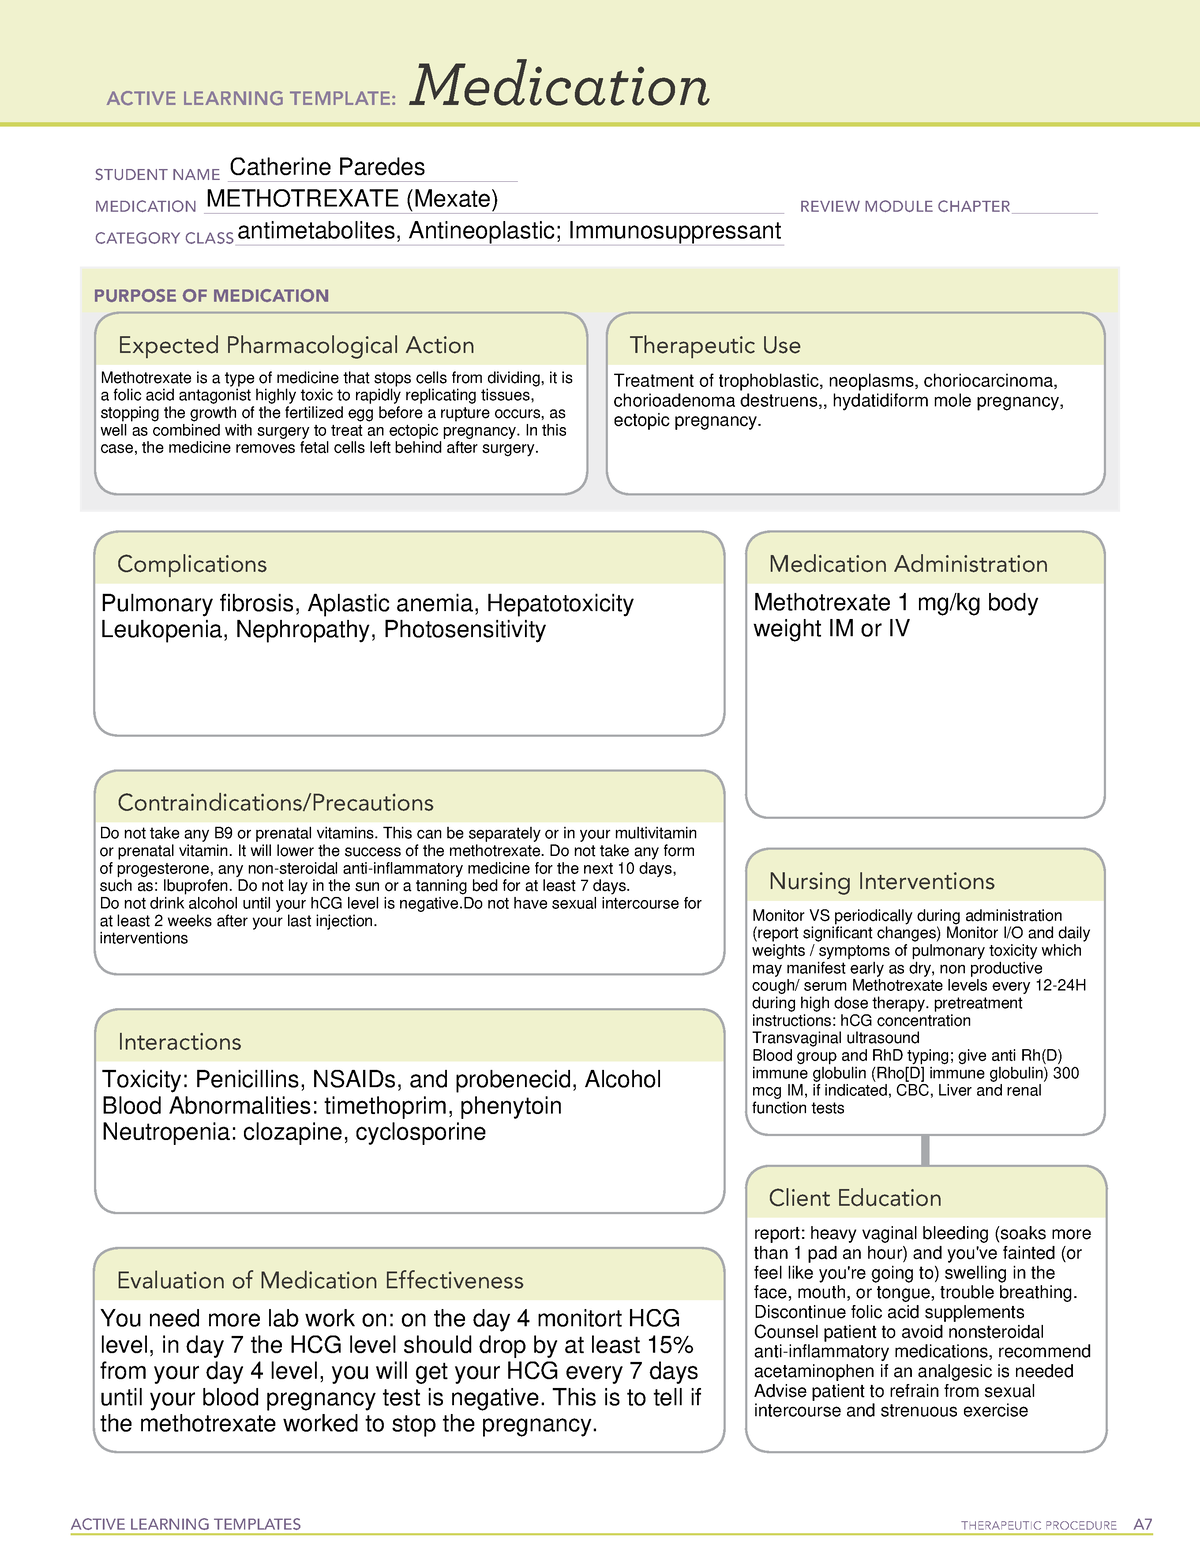 methotrexate-ati-template-active-learning-templates-therapeutic